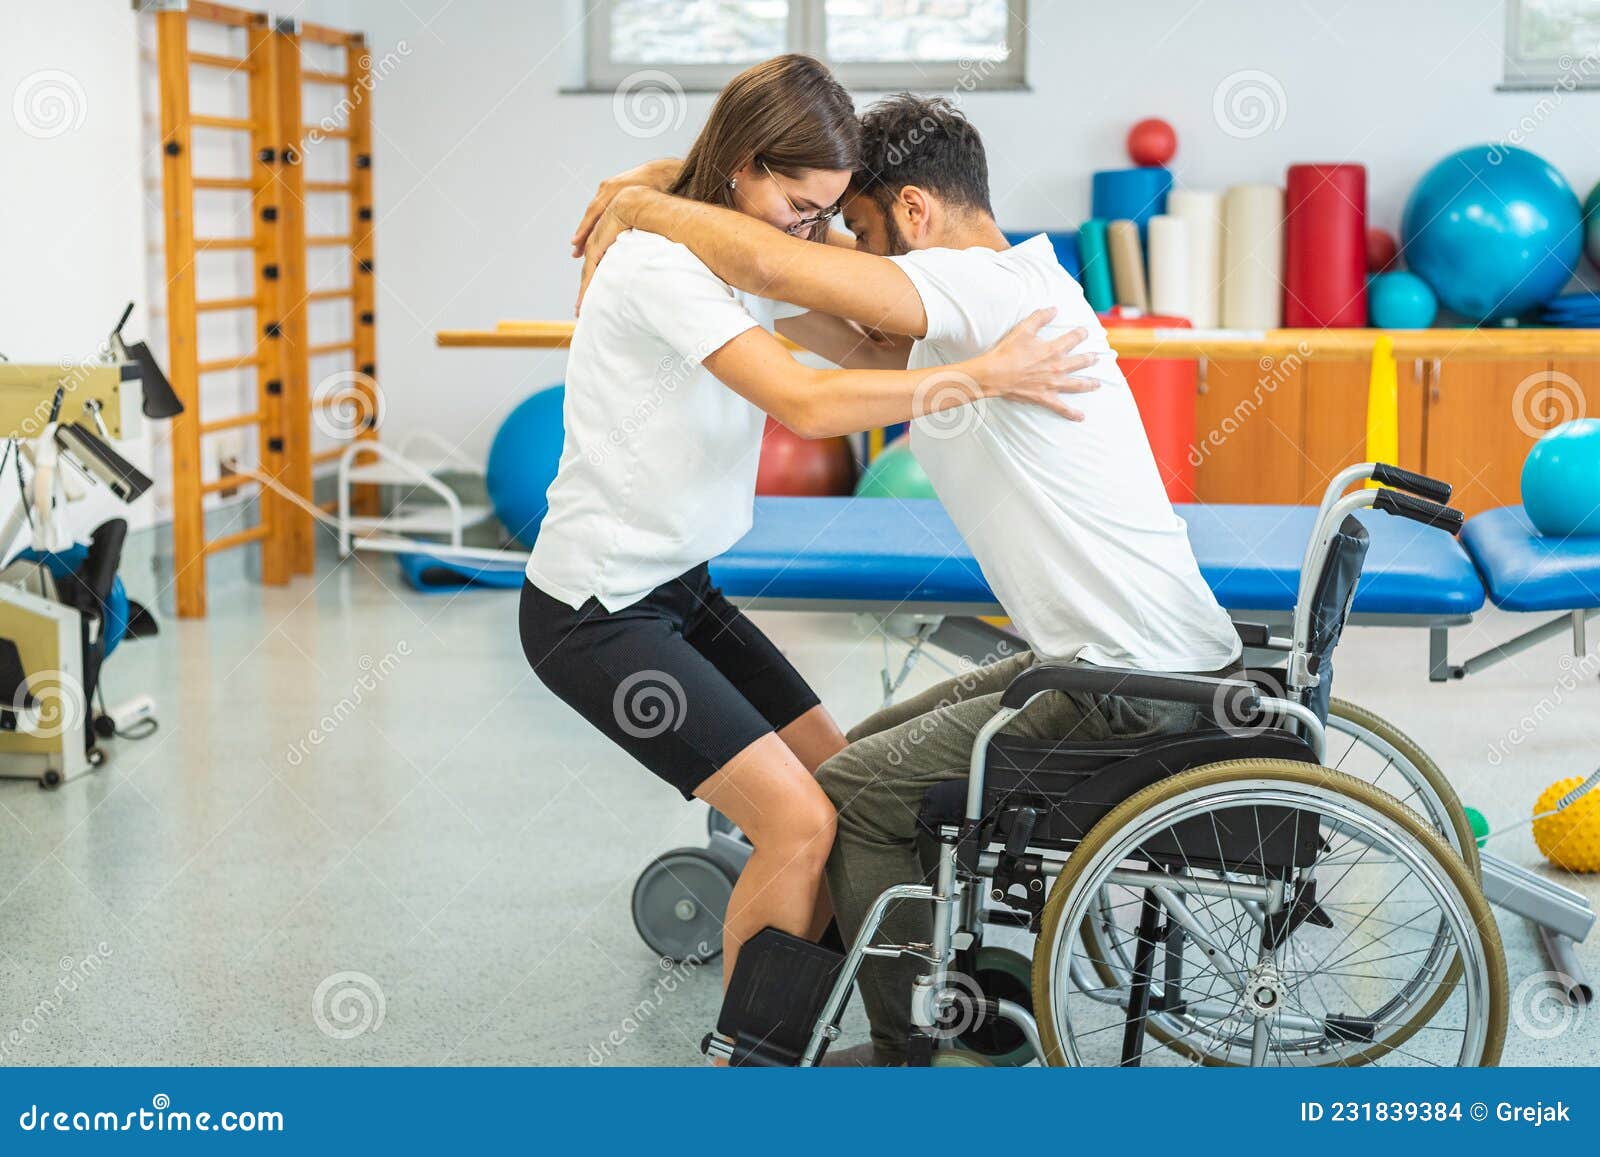 proper lifting technique from a wheelchair